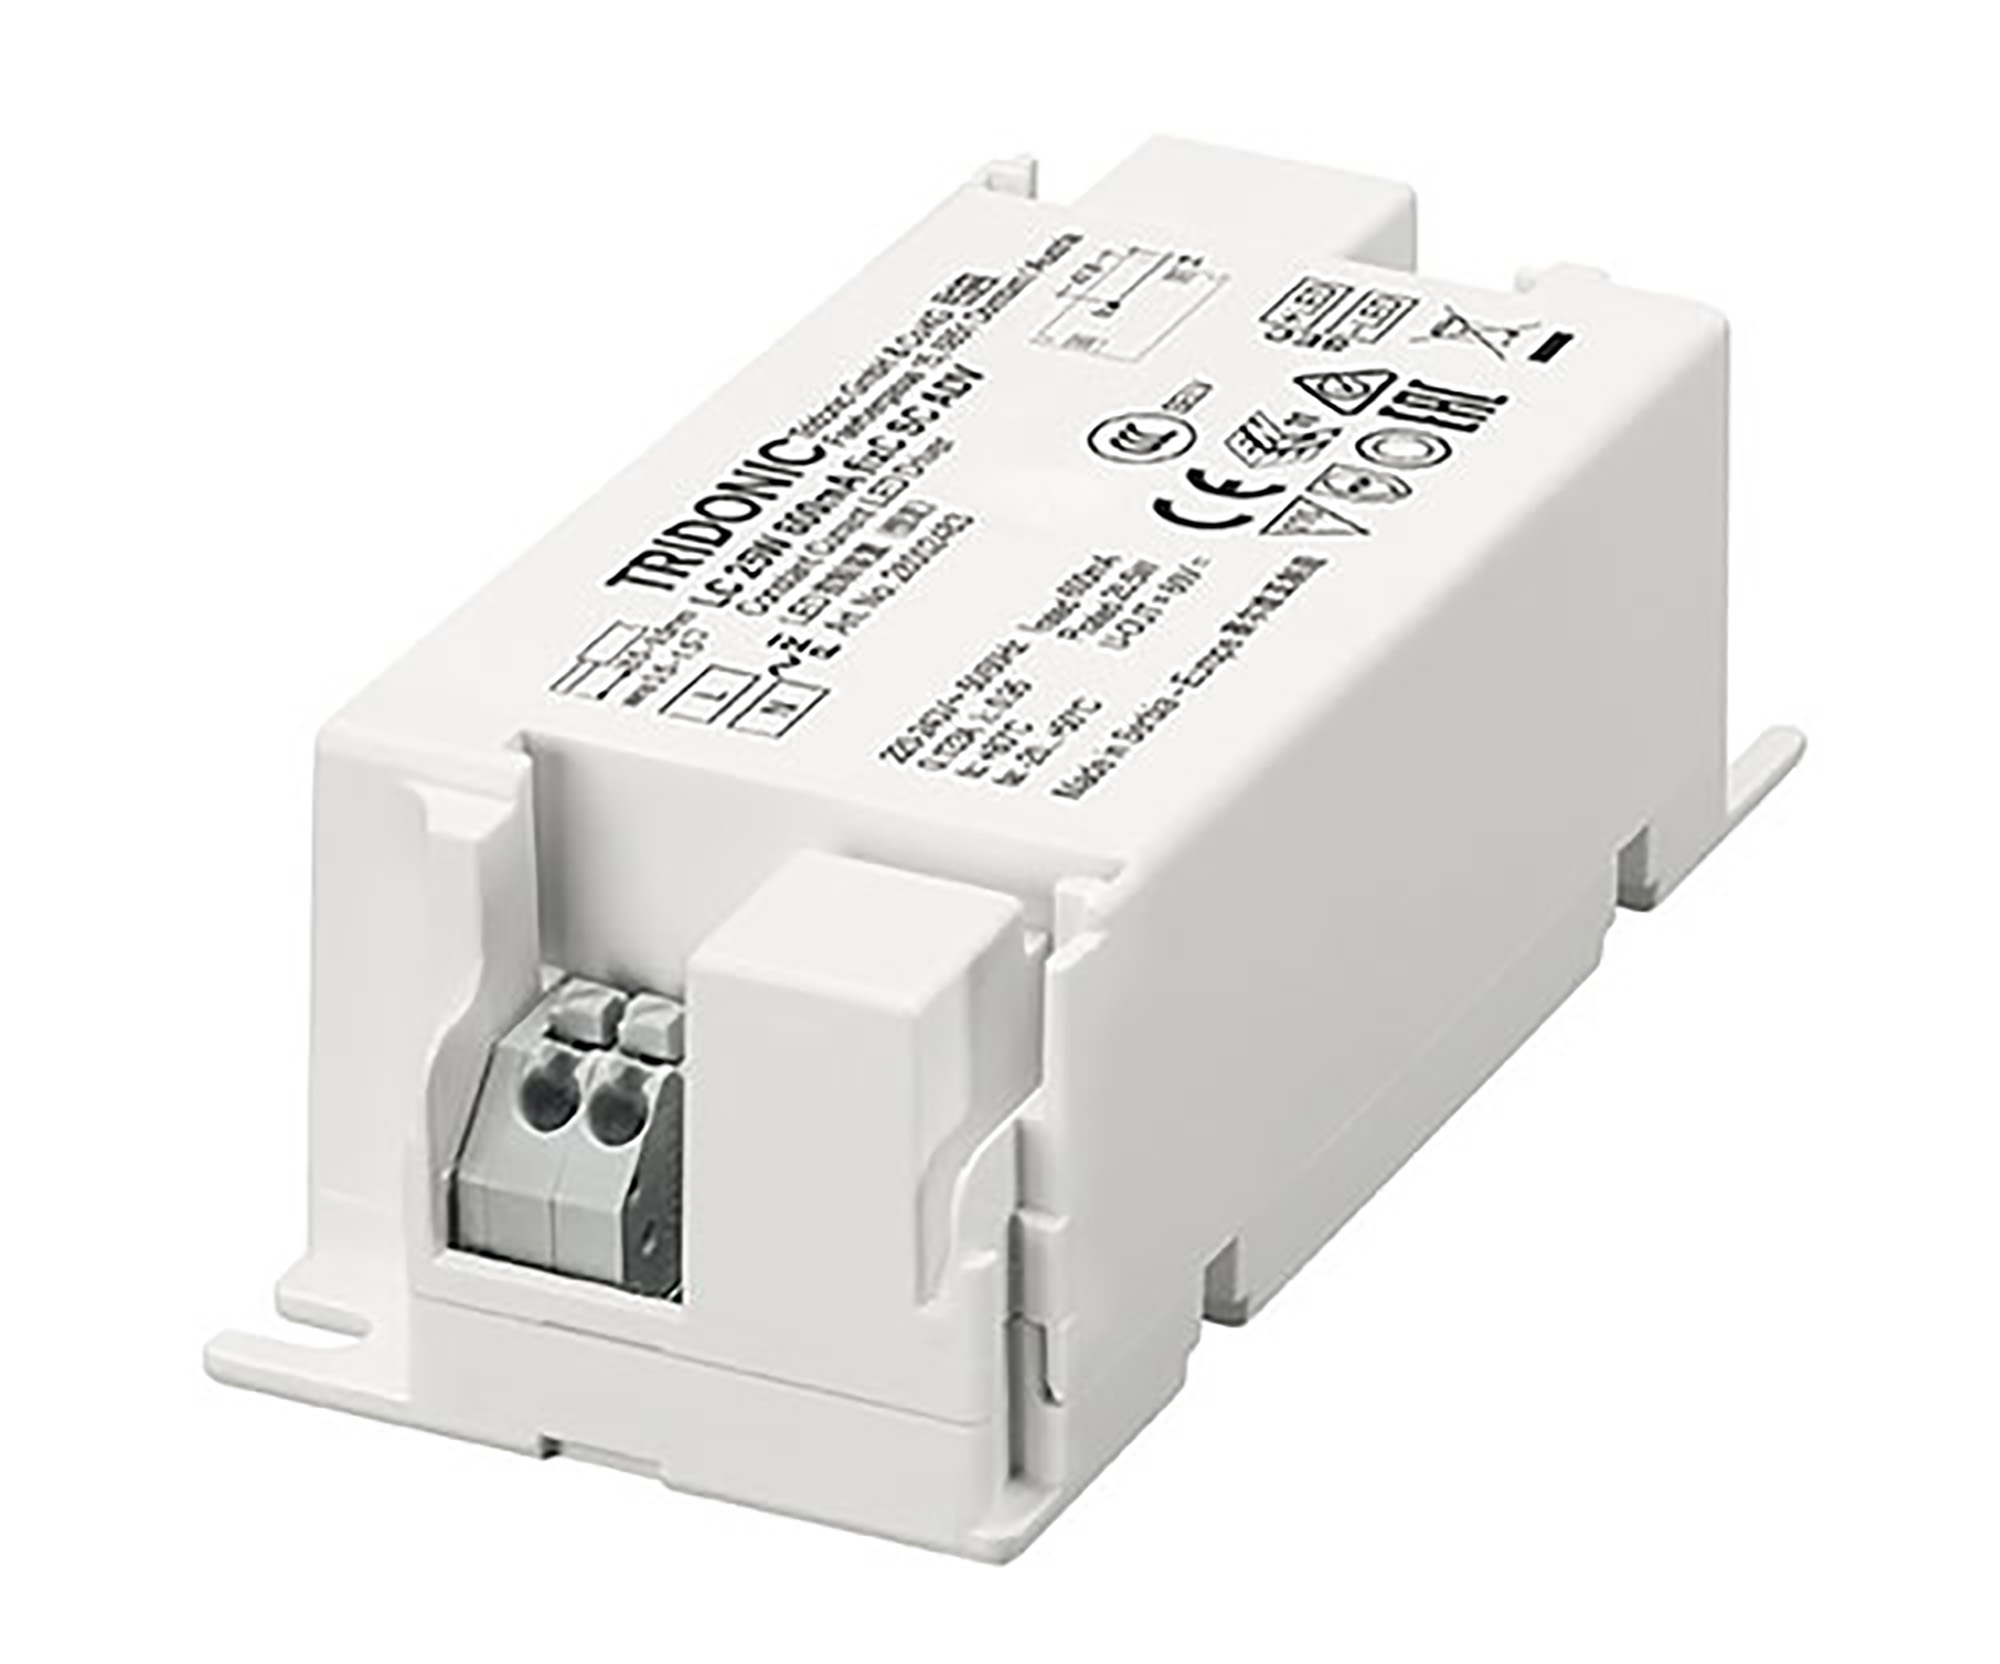 28002484  Tridonic, LC 30W 700mA fixC SC ADV, LED Converter Compact Fixed Output, Made In PRC, 5yrs Warranty